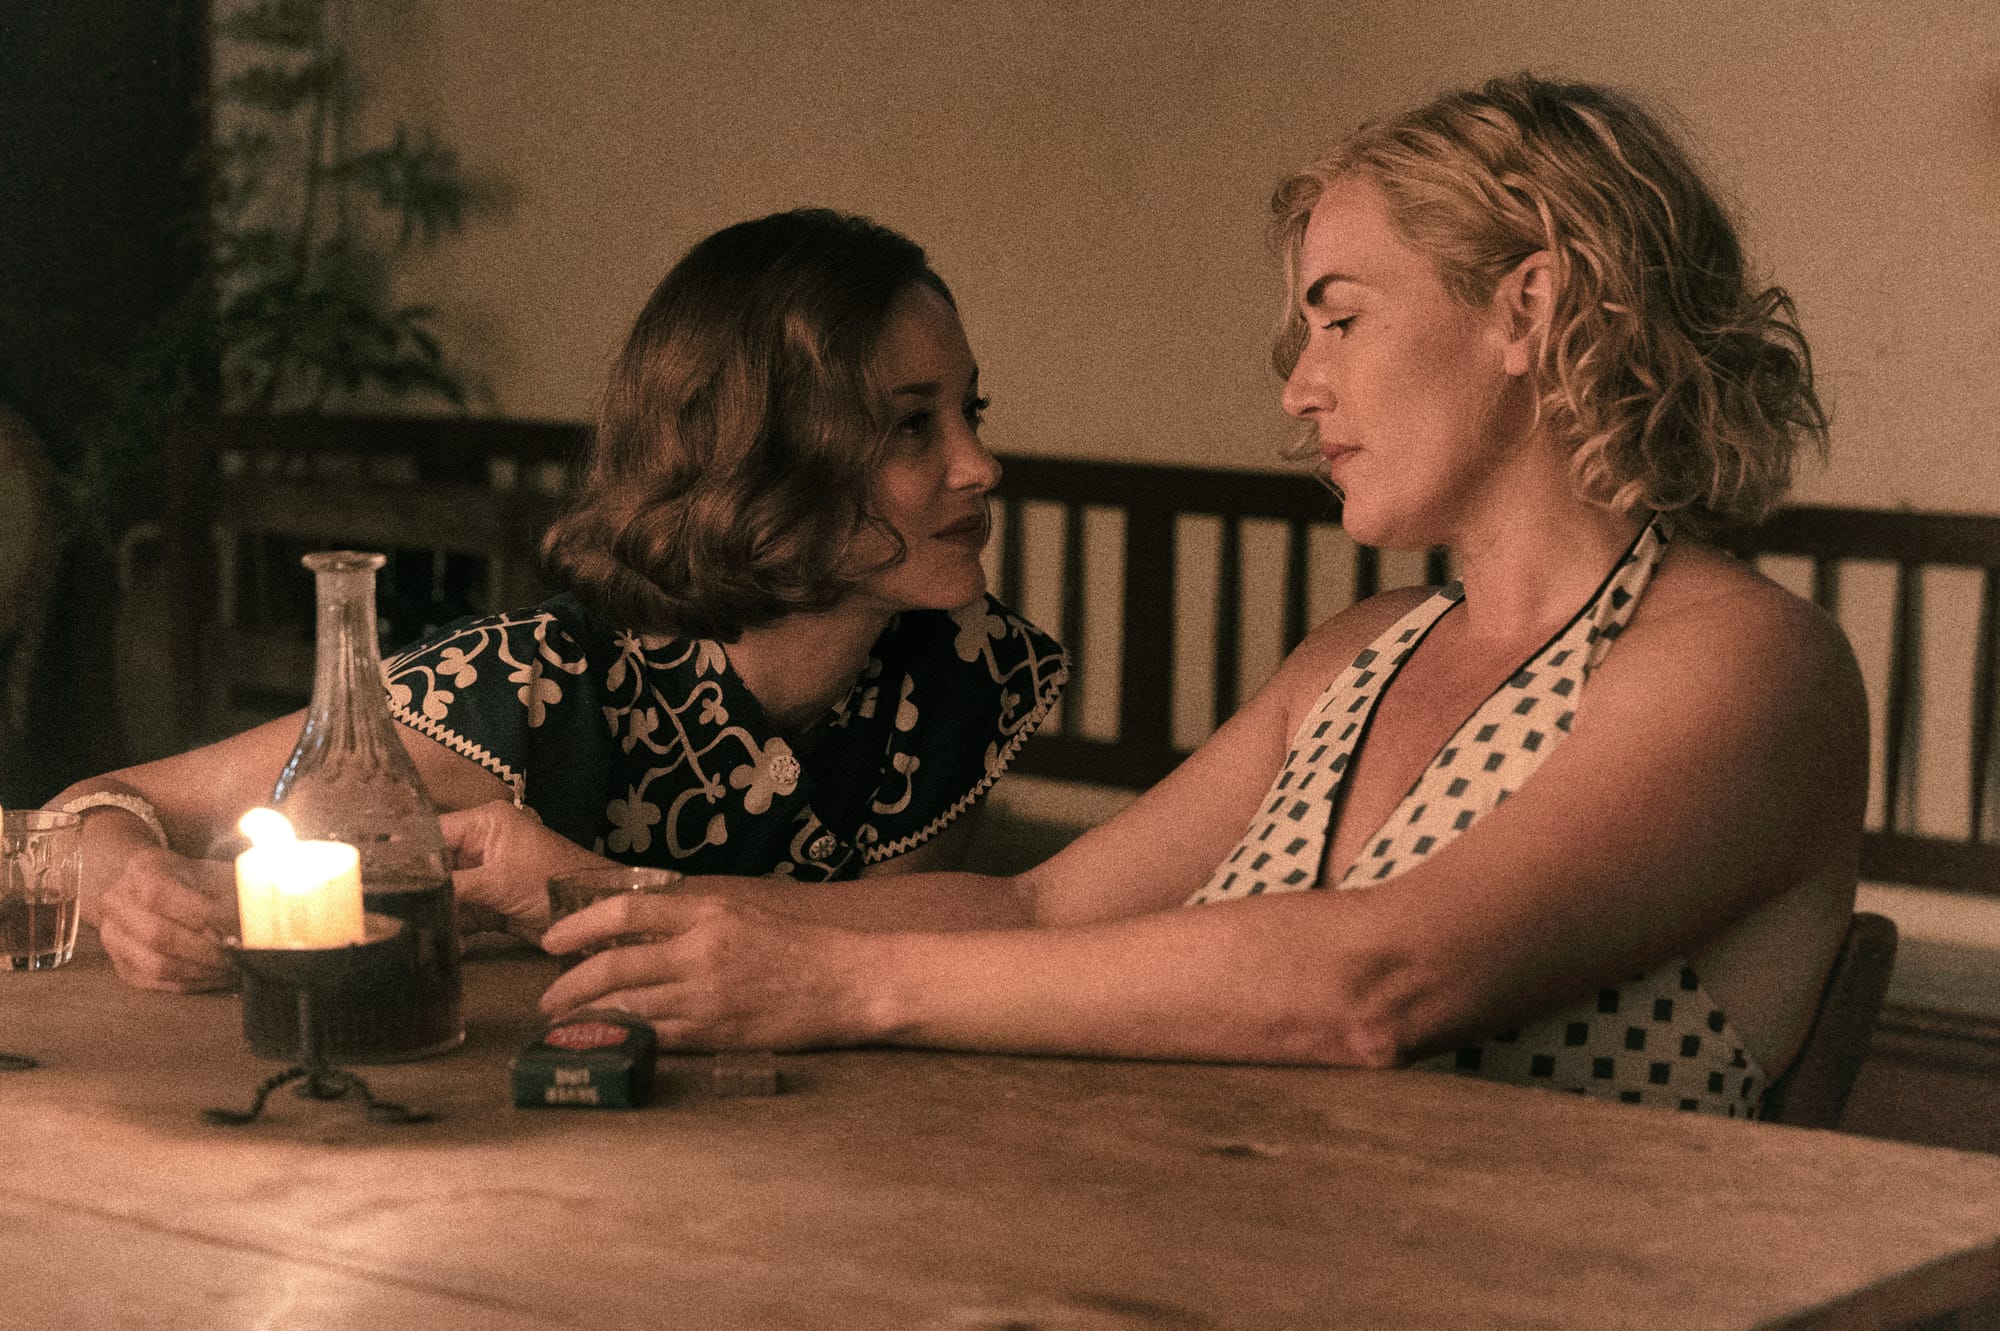 The Luminary Review: Kate Winslet, Roisin Gallagher and Juliette Binoche in the Best Films and Dramas to Watch Now